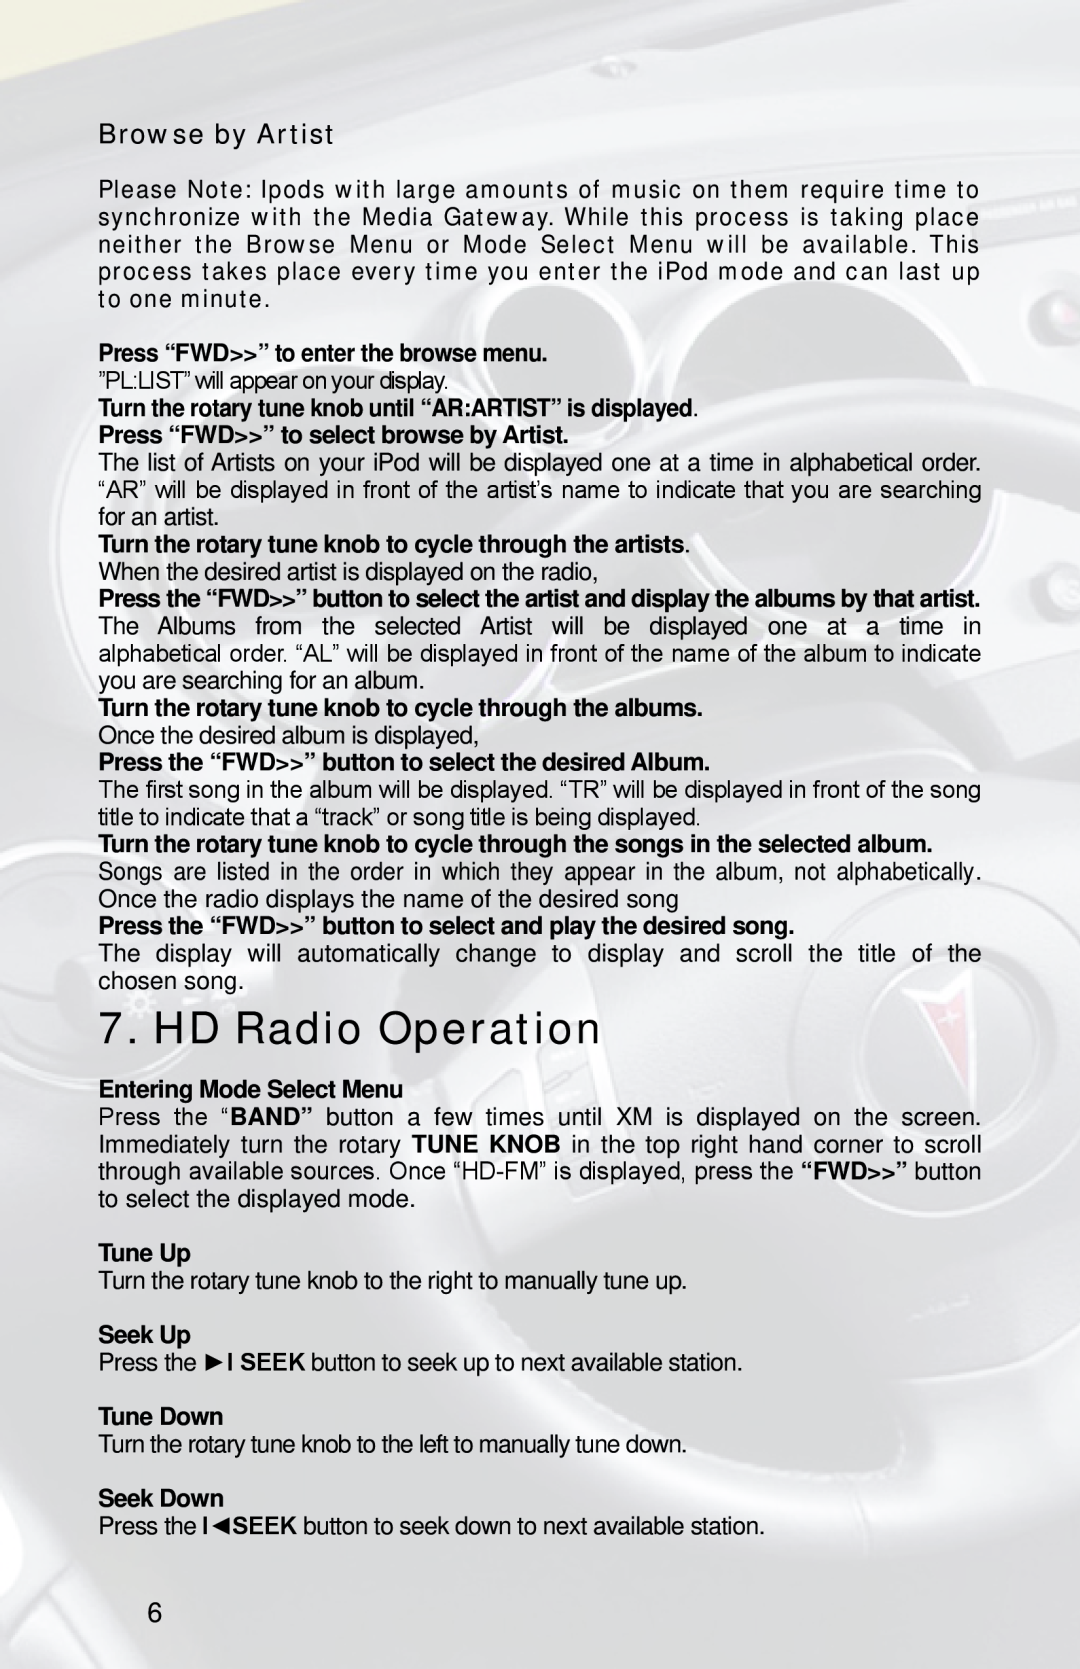 iSimple PGHGM2, PXAMG owner manual HD Radio Operation, Browse by Artist 